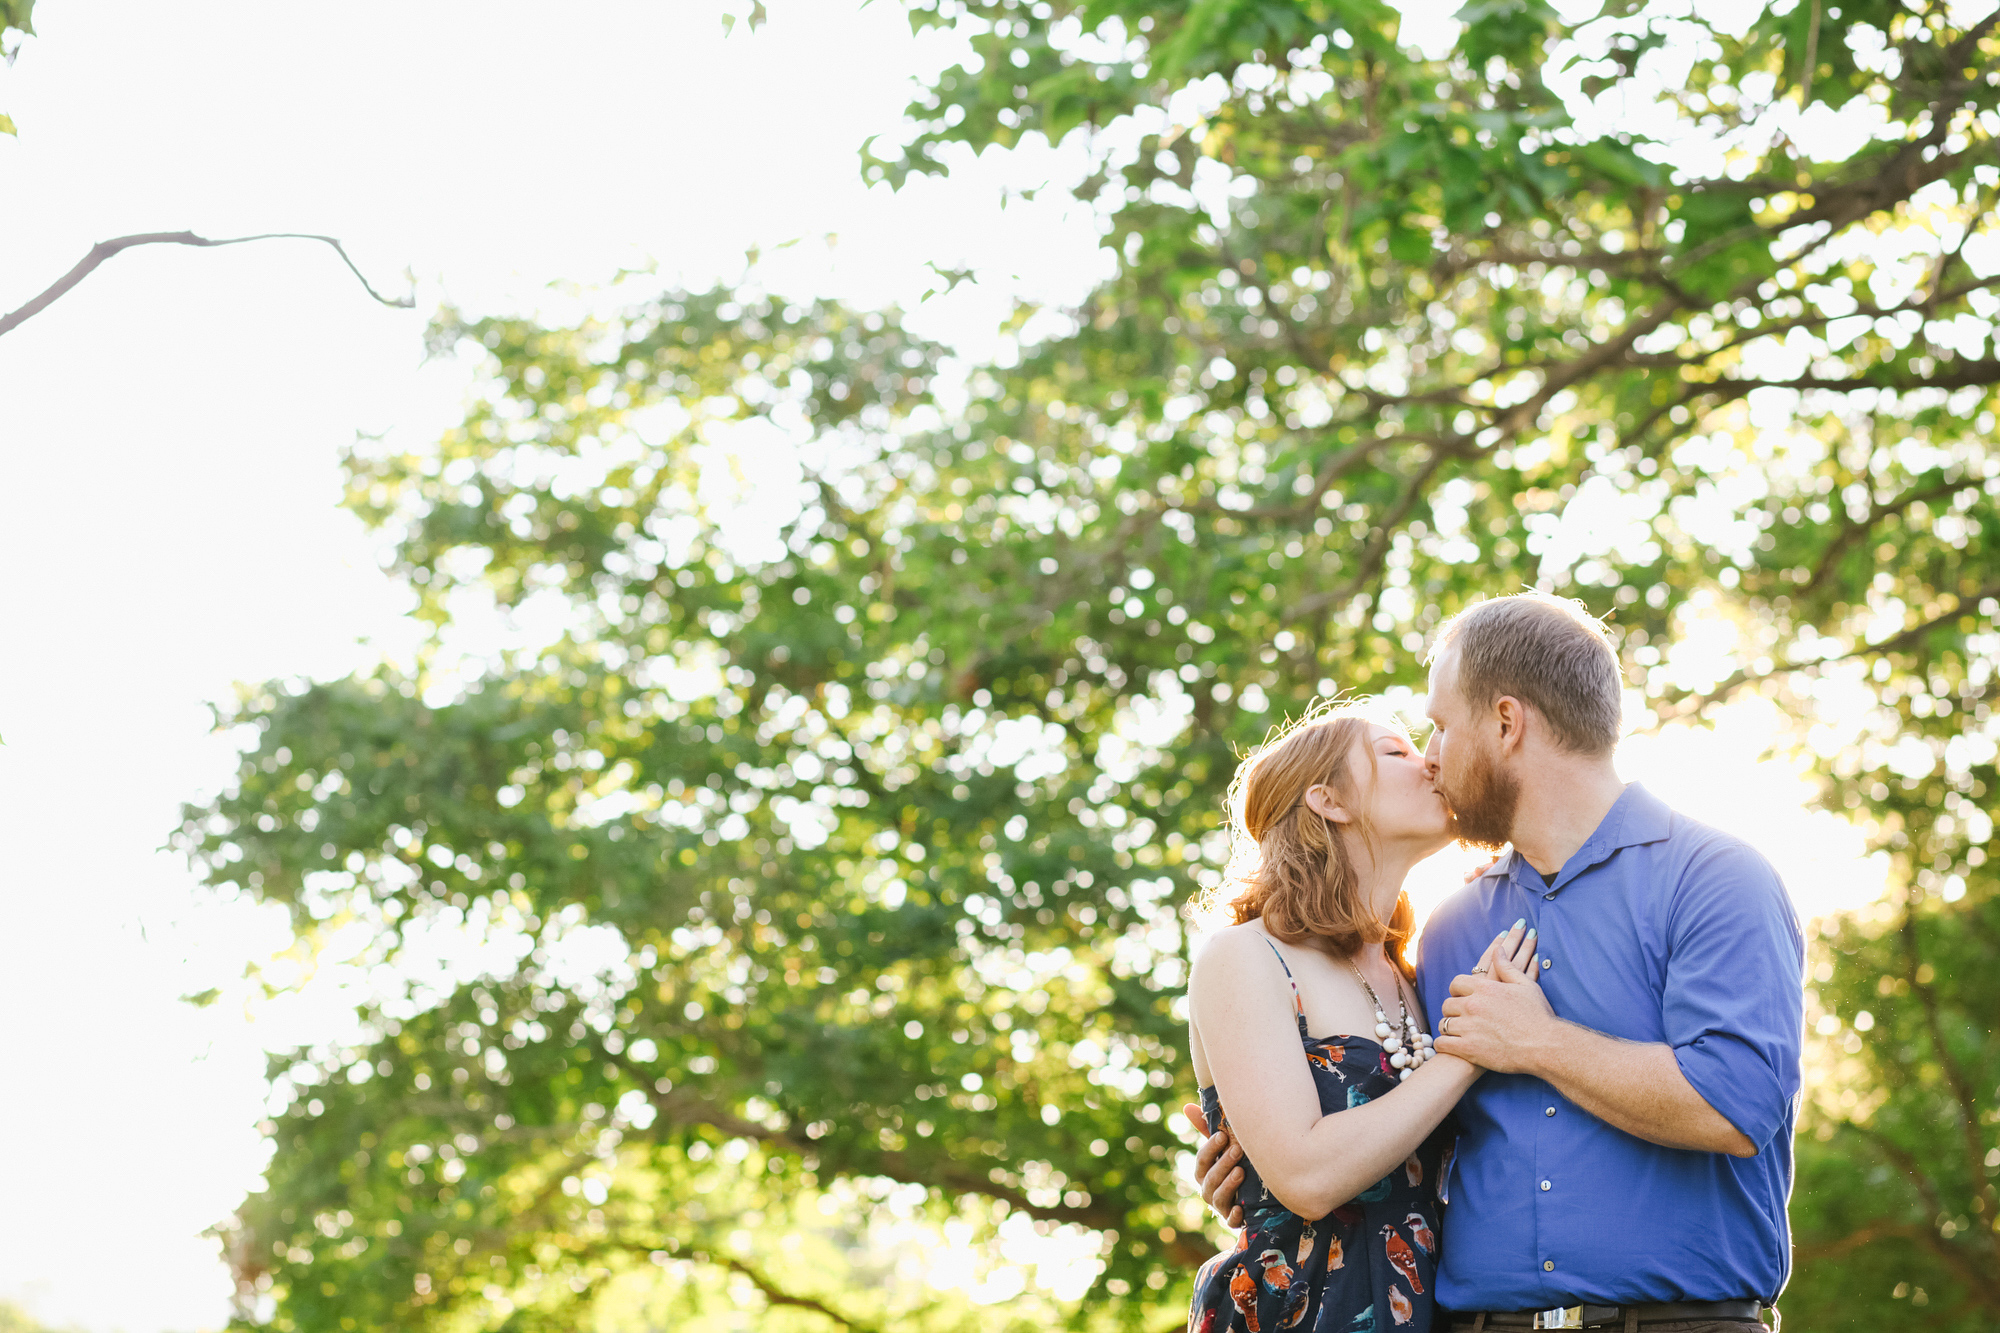 The couple kissing during their engagement session.